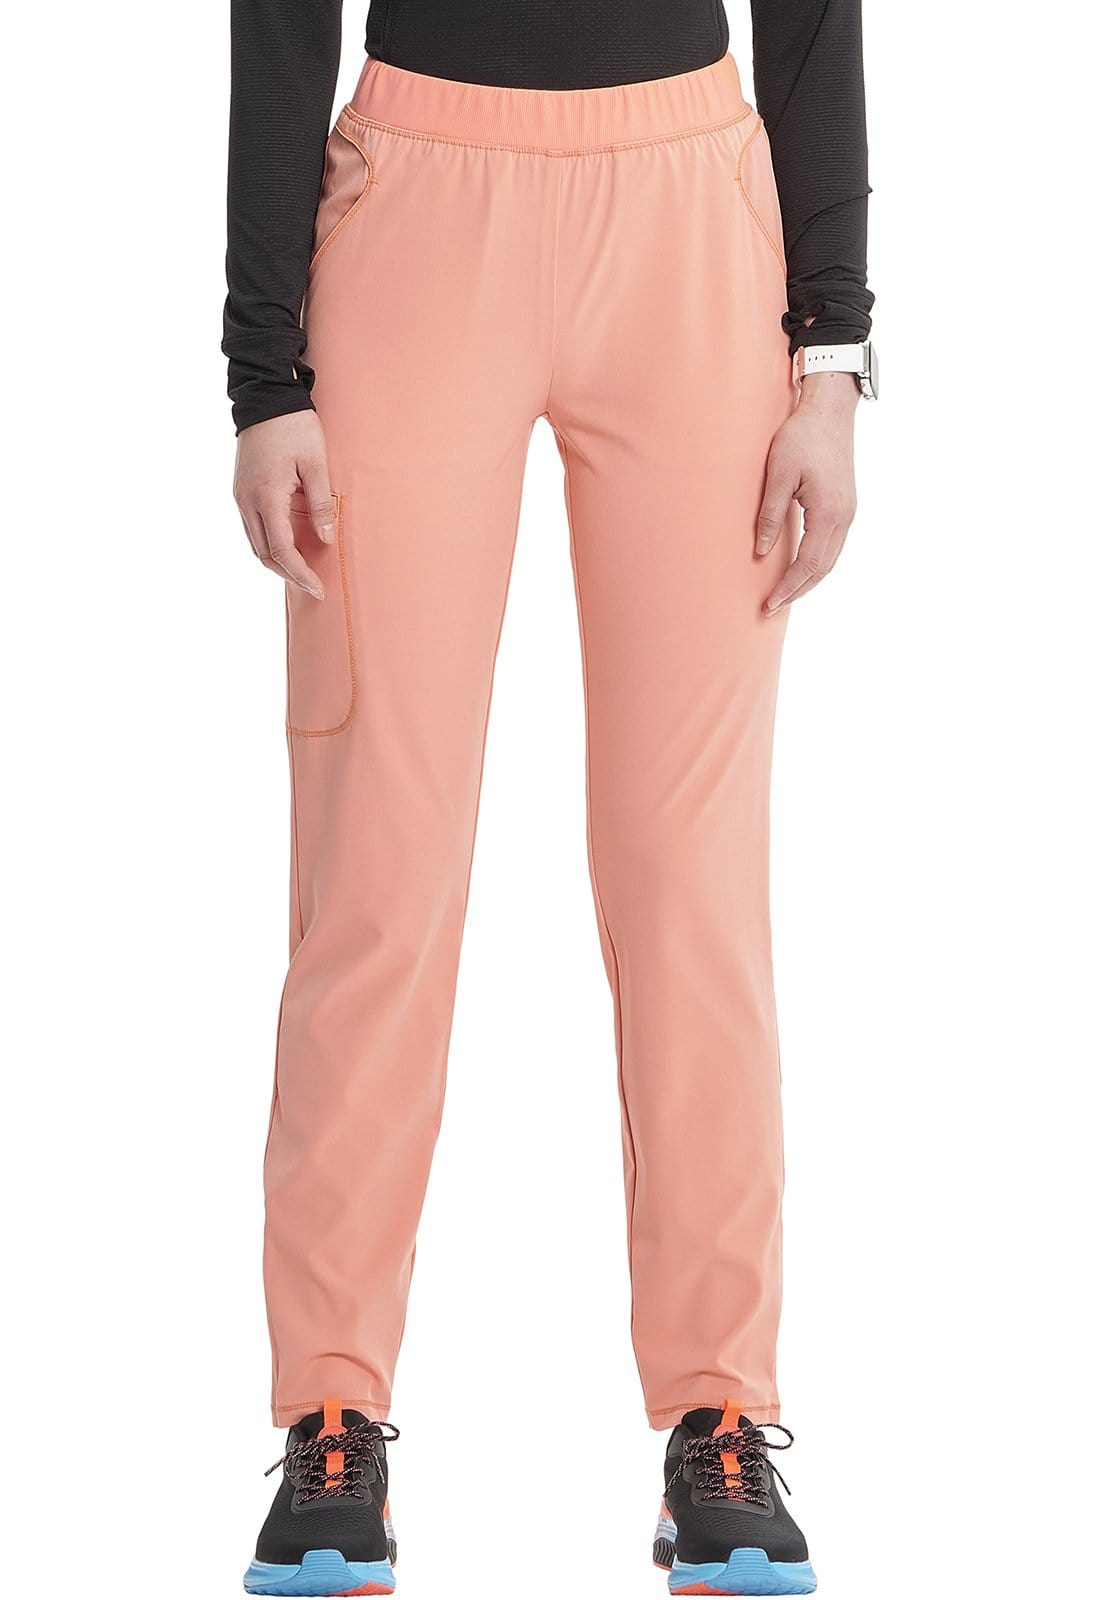 Infinity Infinity GNR8 Electric Coral / XS Infinity GNR8 Petite Mid-rise Tapered Leg Pant IN120AP